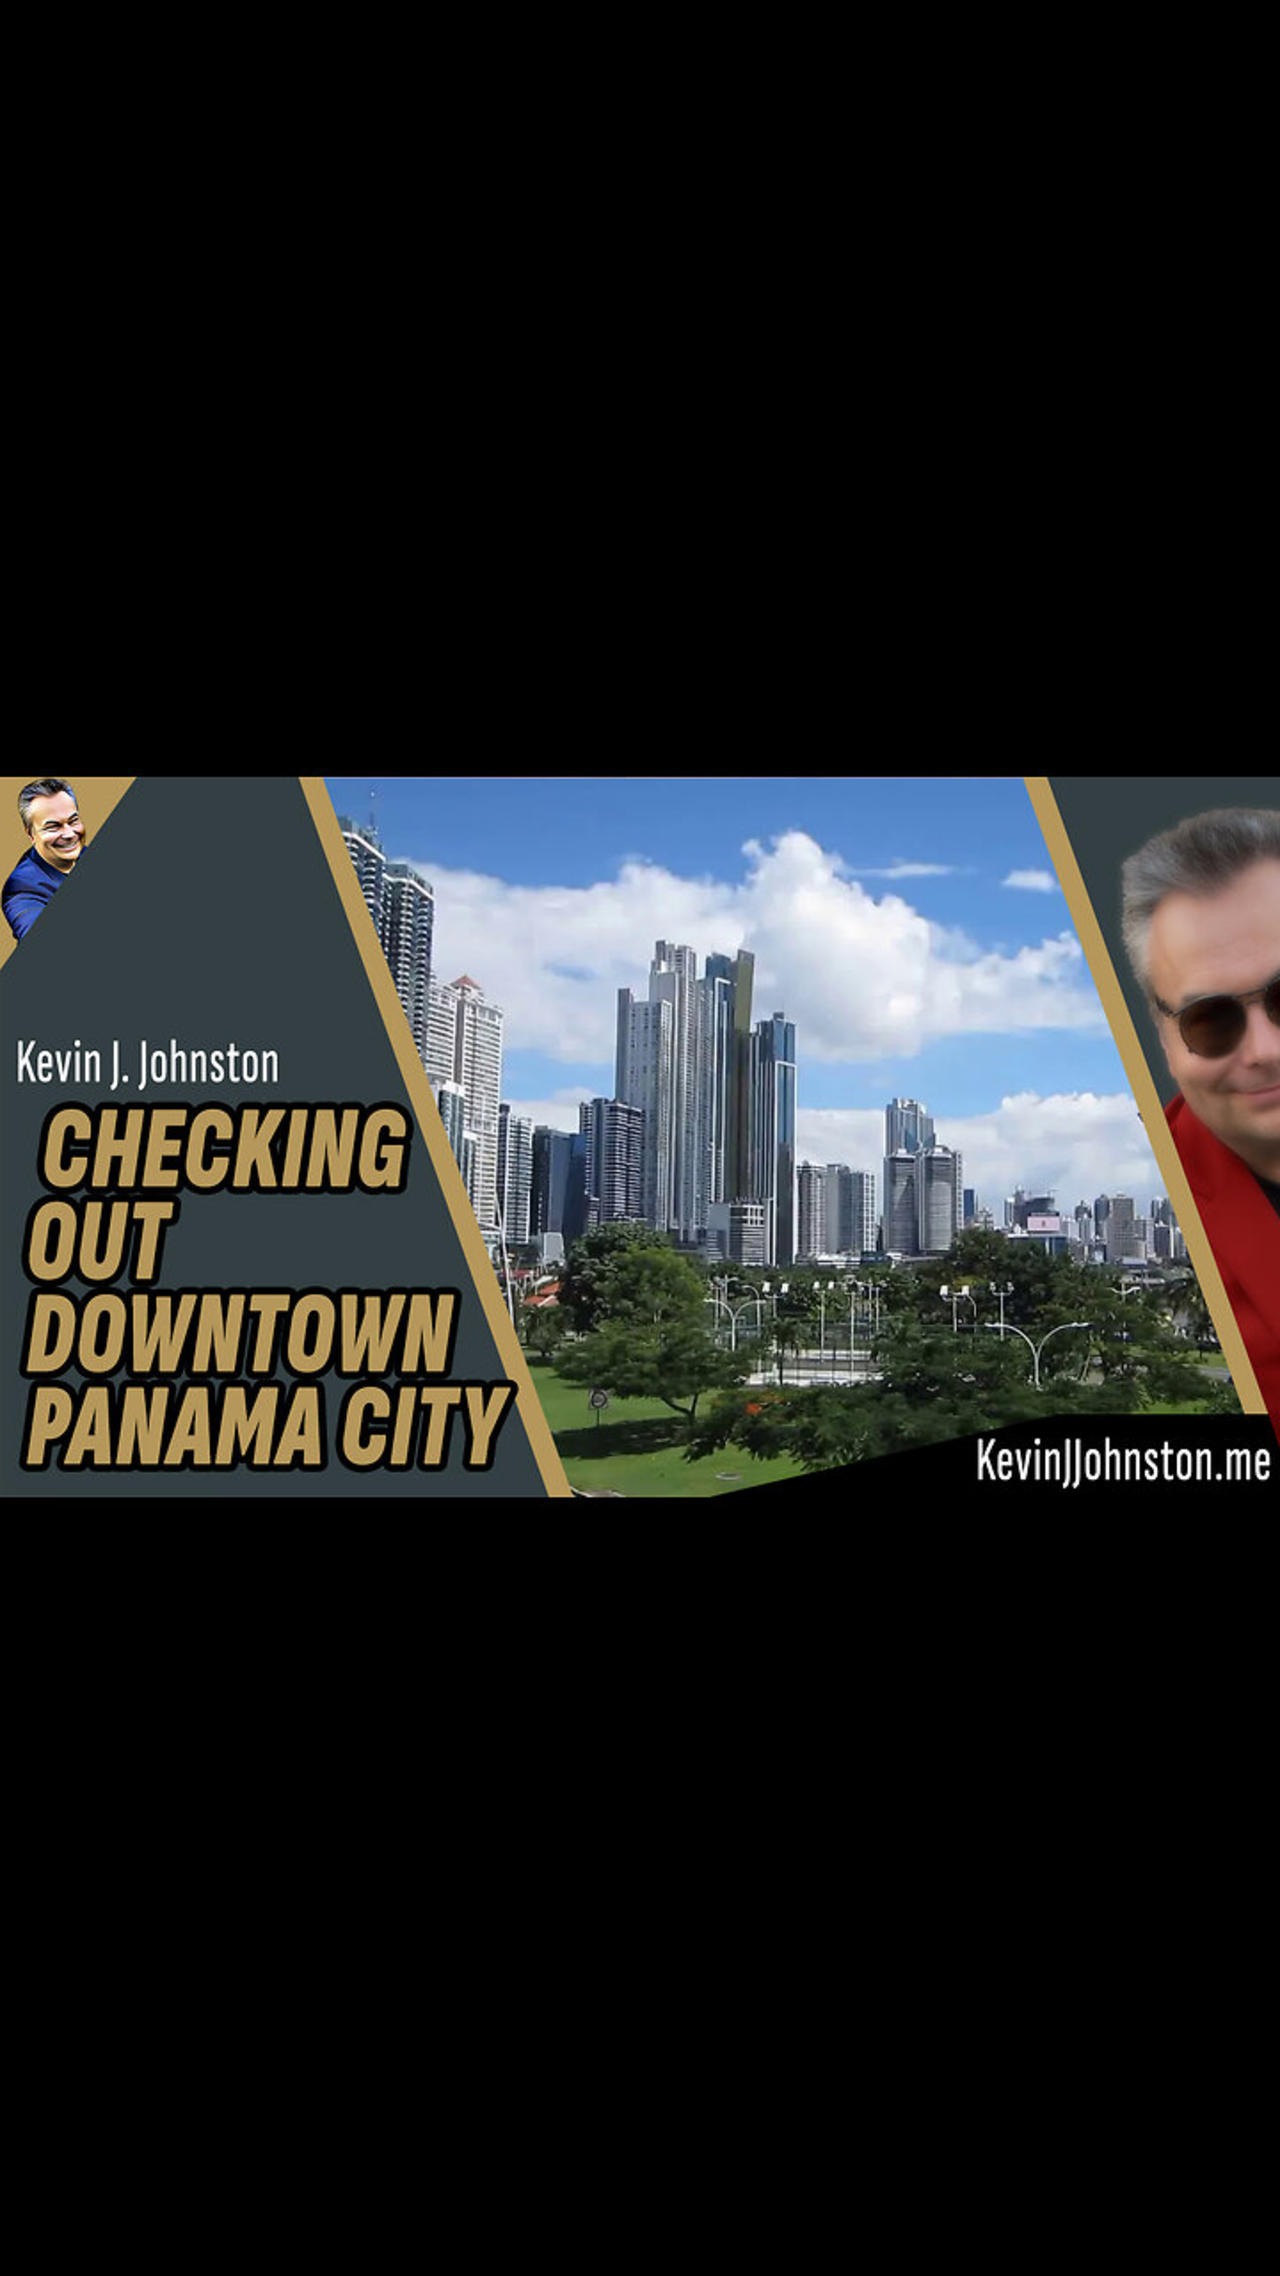 CHECKING OUT DOWNTOWN PANAMA CITY